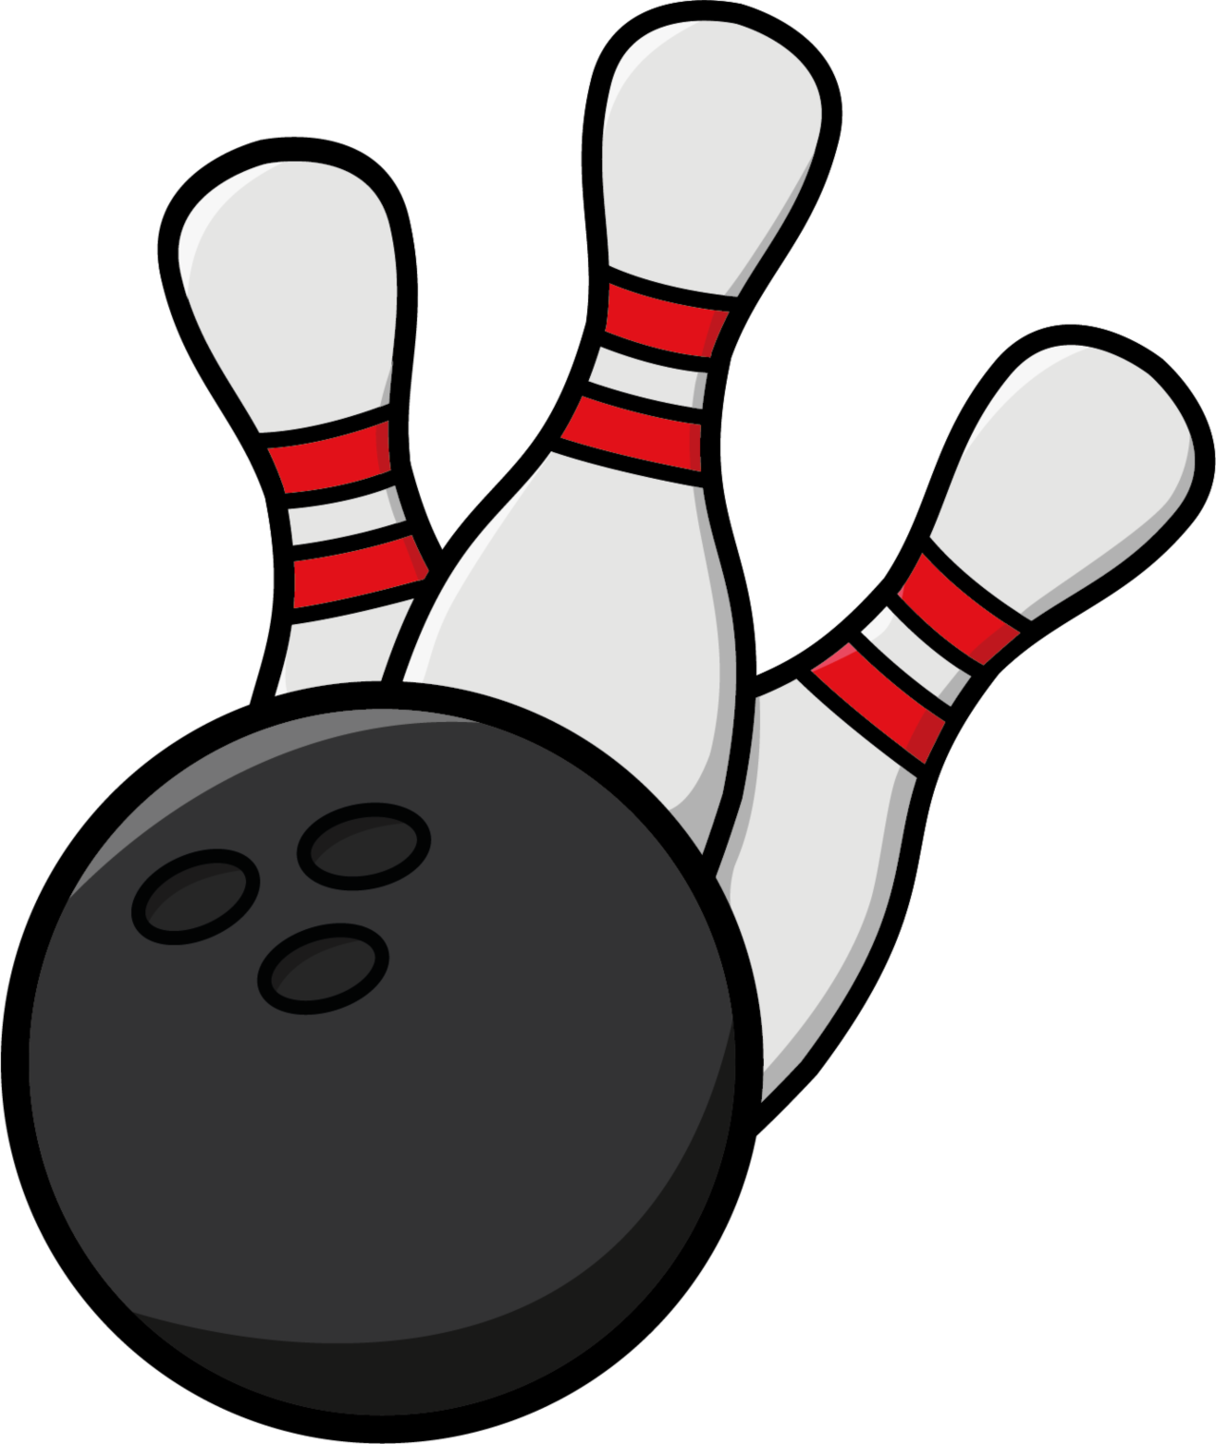 Bowling Cartoon Images Clipart - Free to use Clip Art Resource